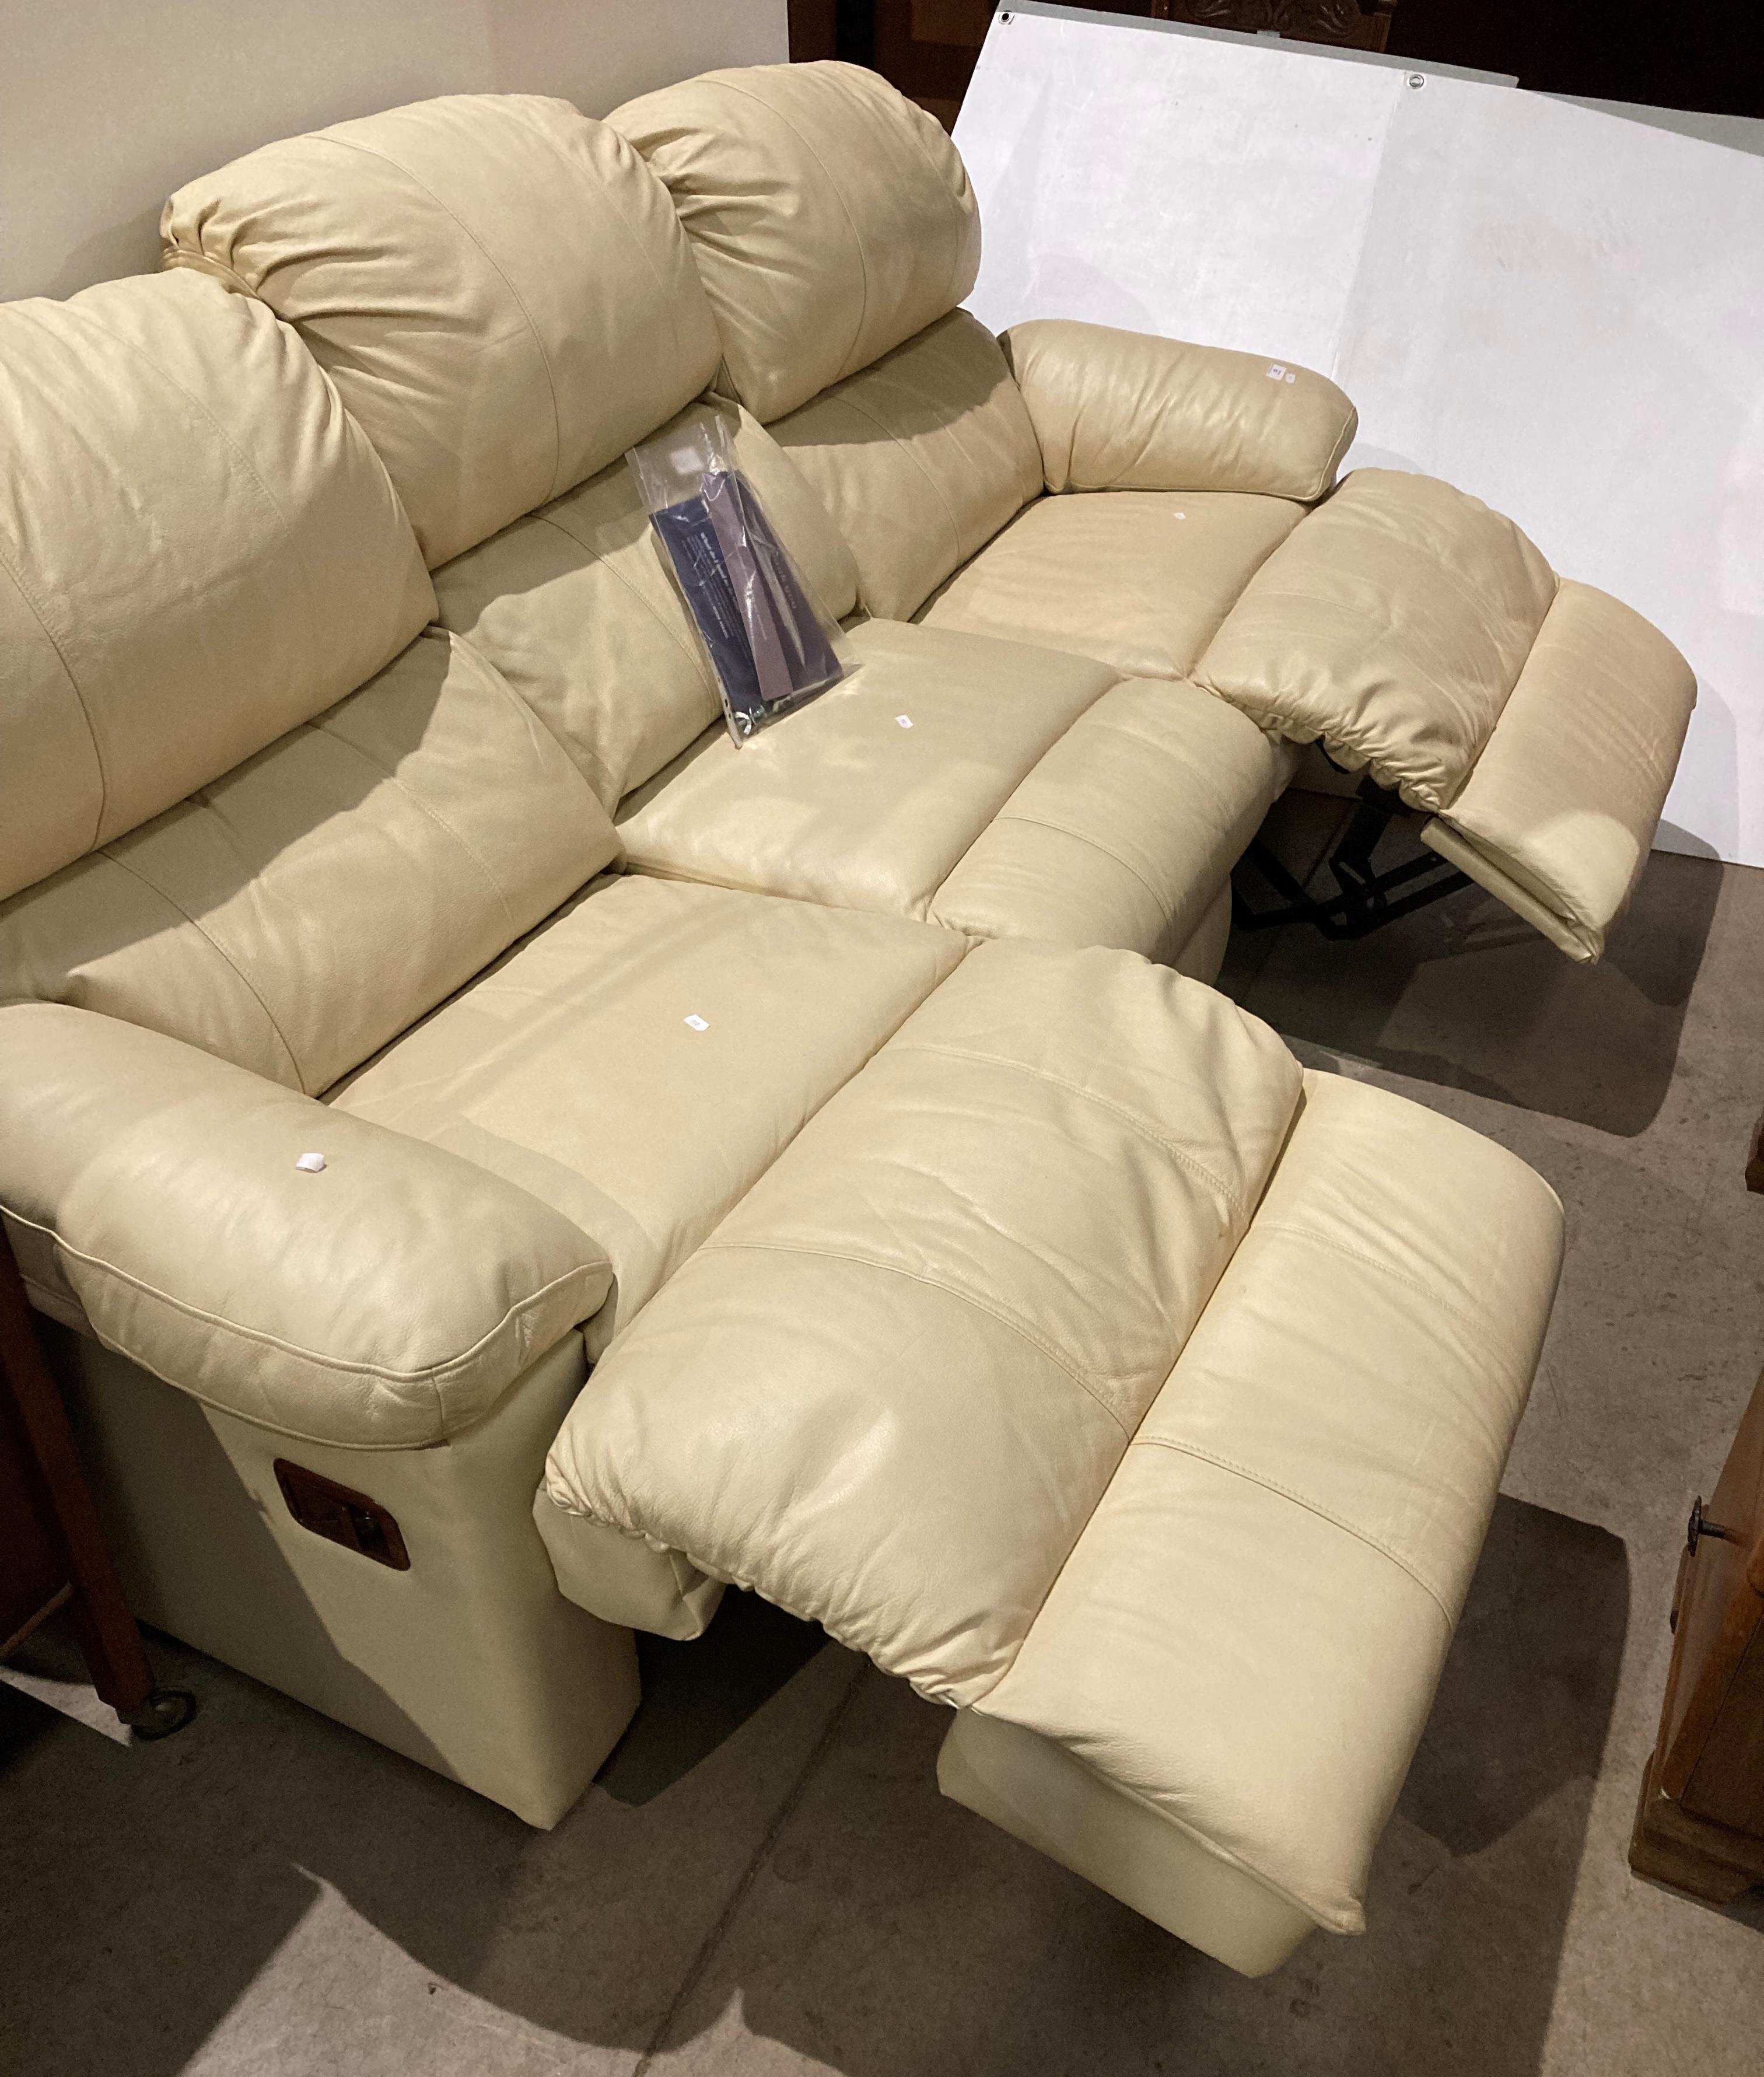 Platinum Linton three seater standard dual rose and recline sofa in Arizona Sand from HSL, - Image 2 of 2